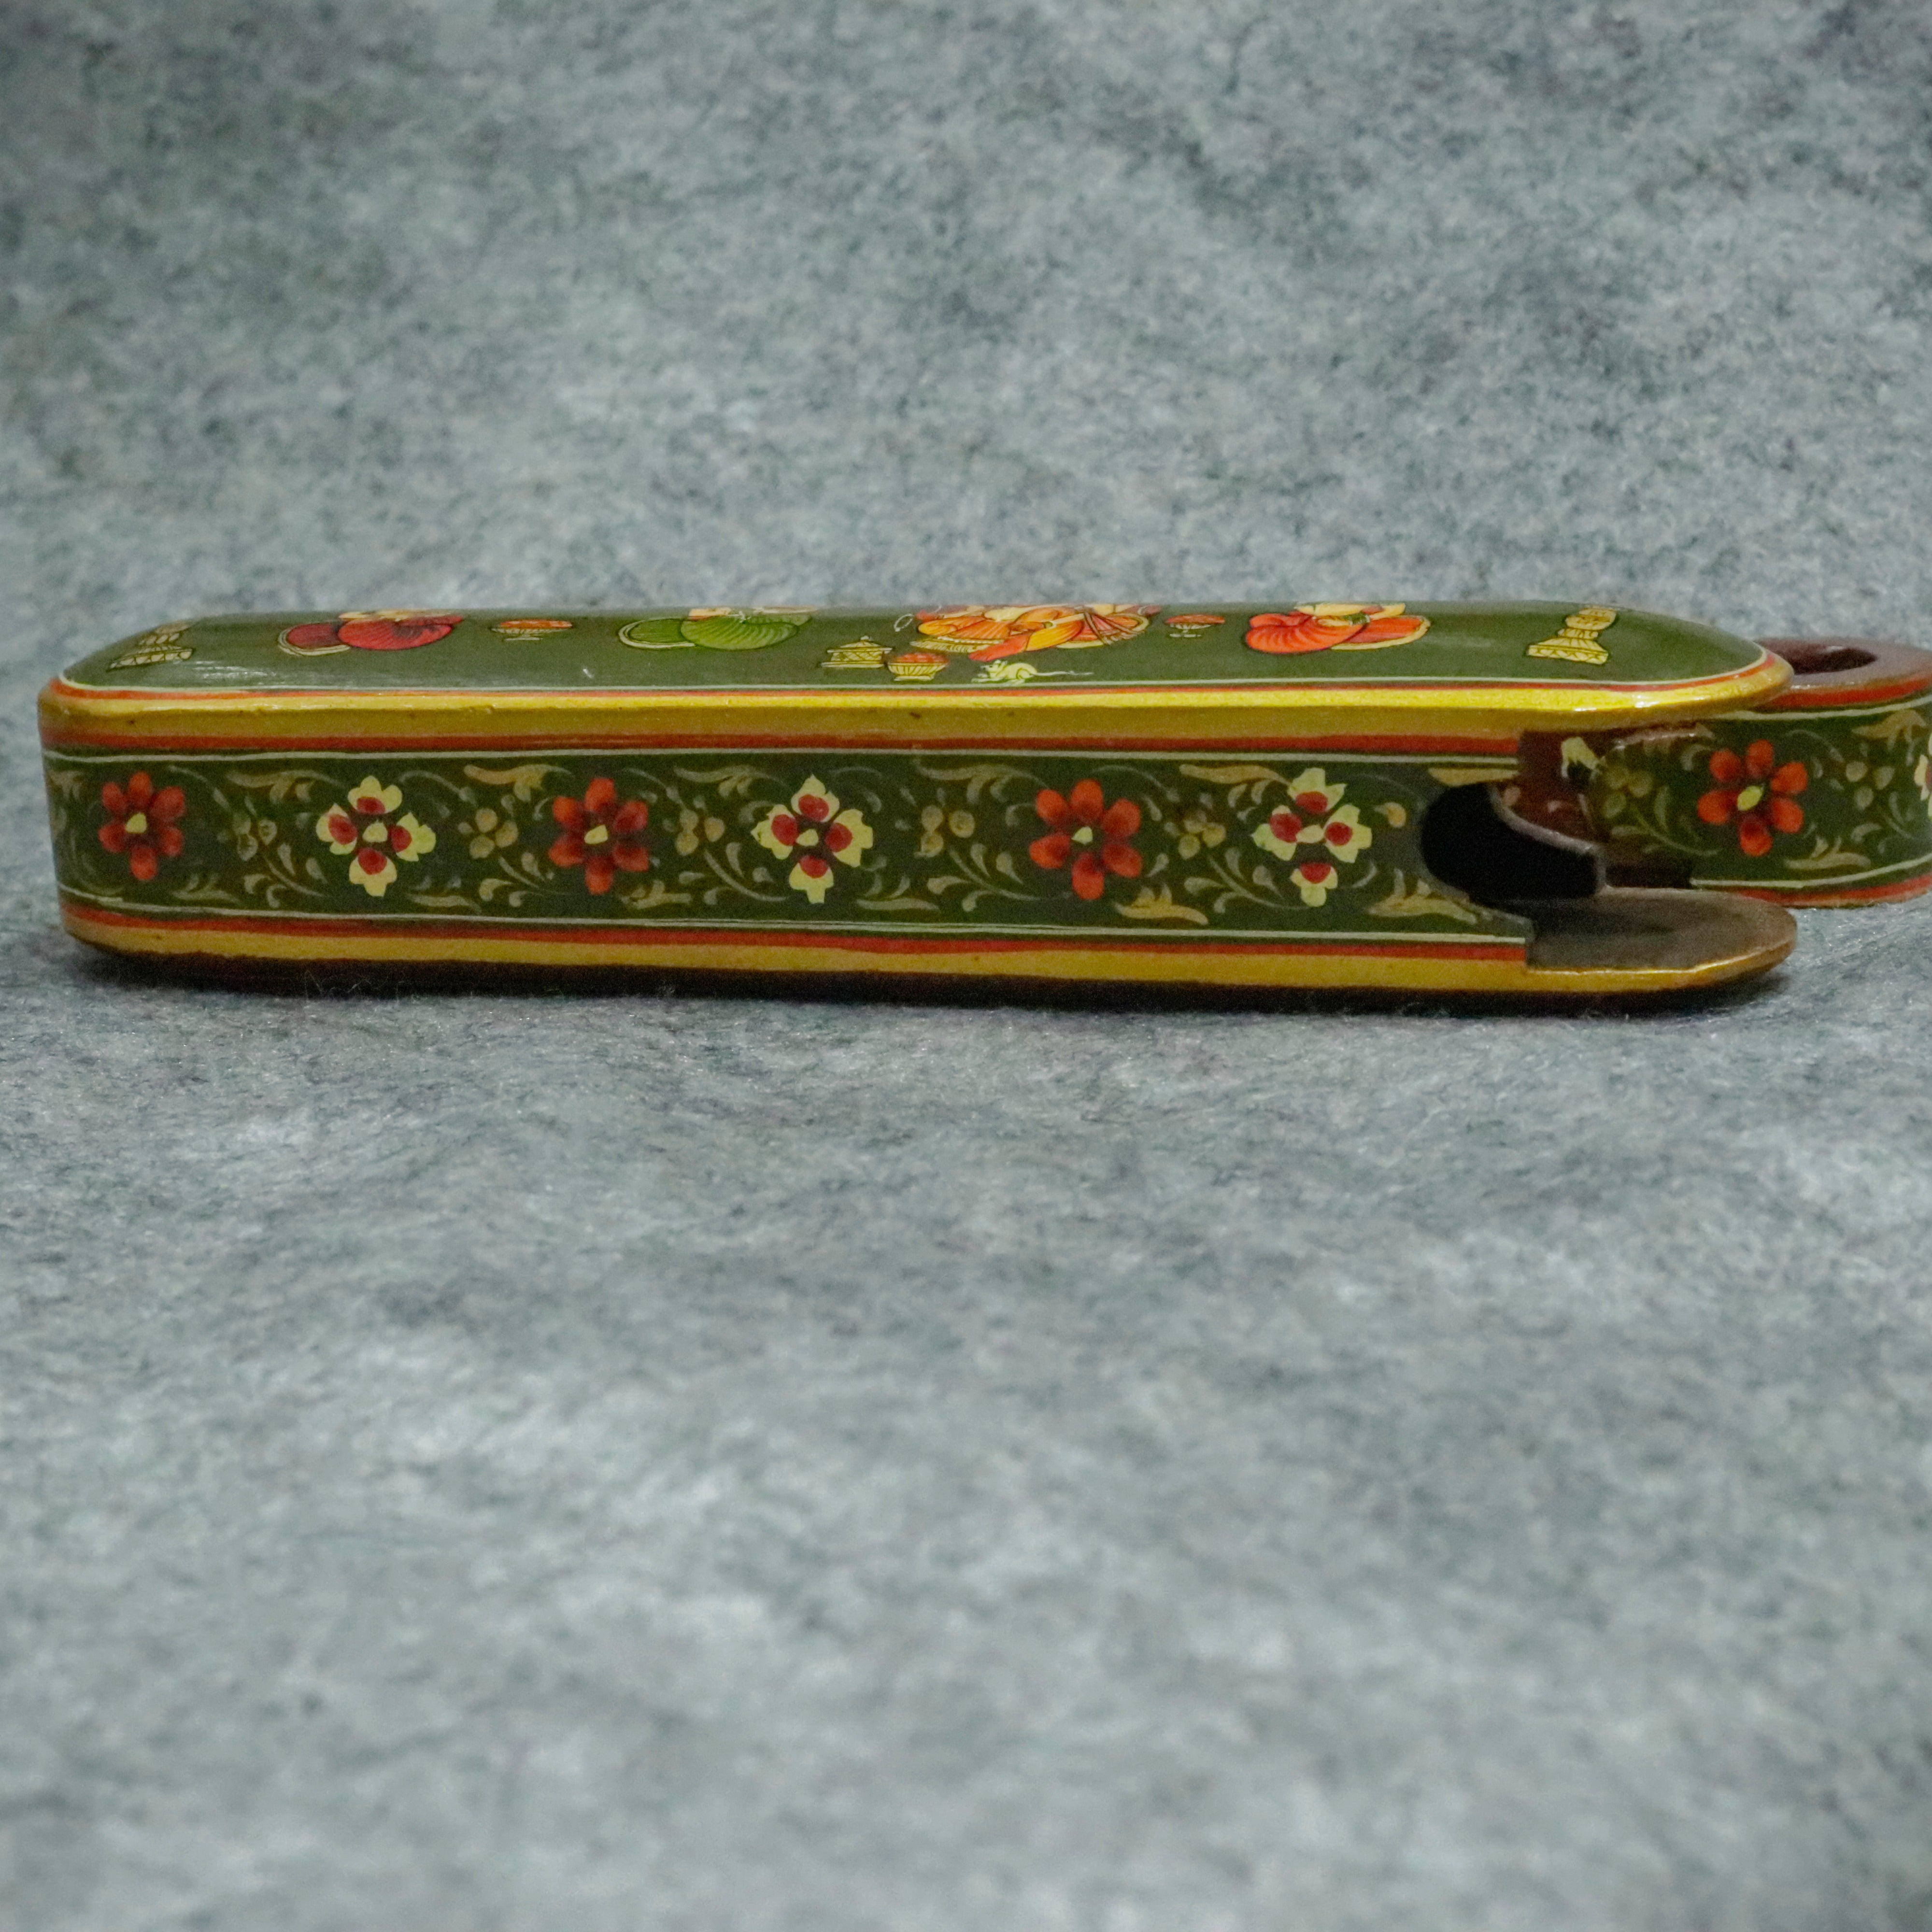 Artisan-Crafted Pen & Pencil Box: Traditional Indian Hand-Painted Elegance Wooden Box